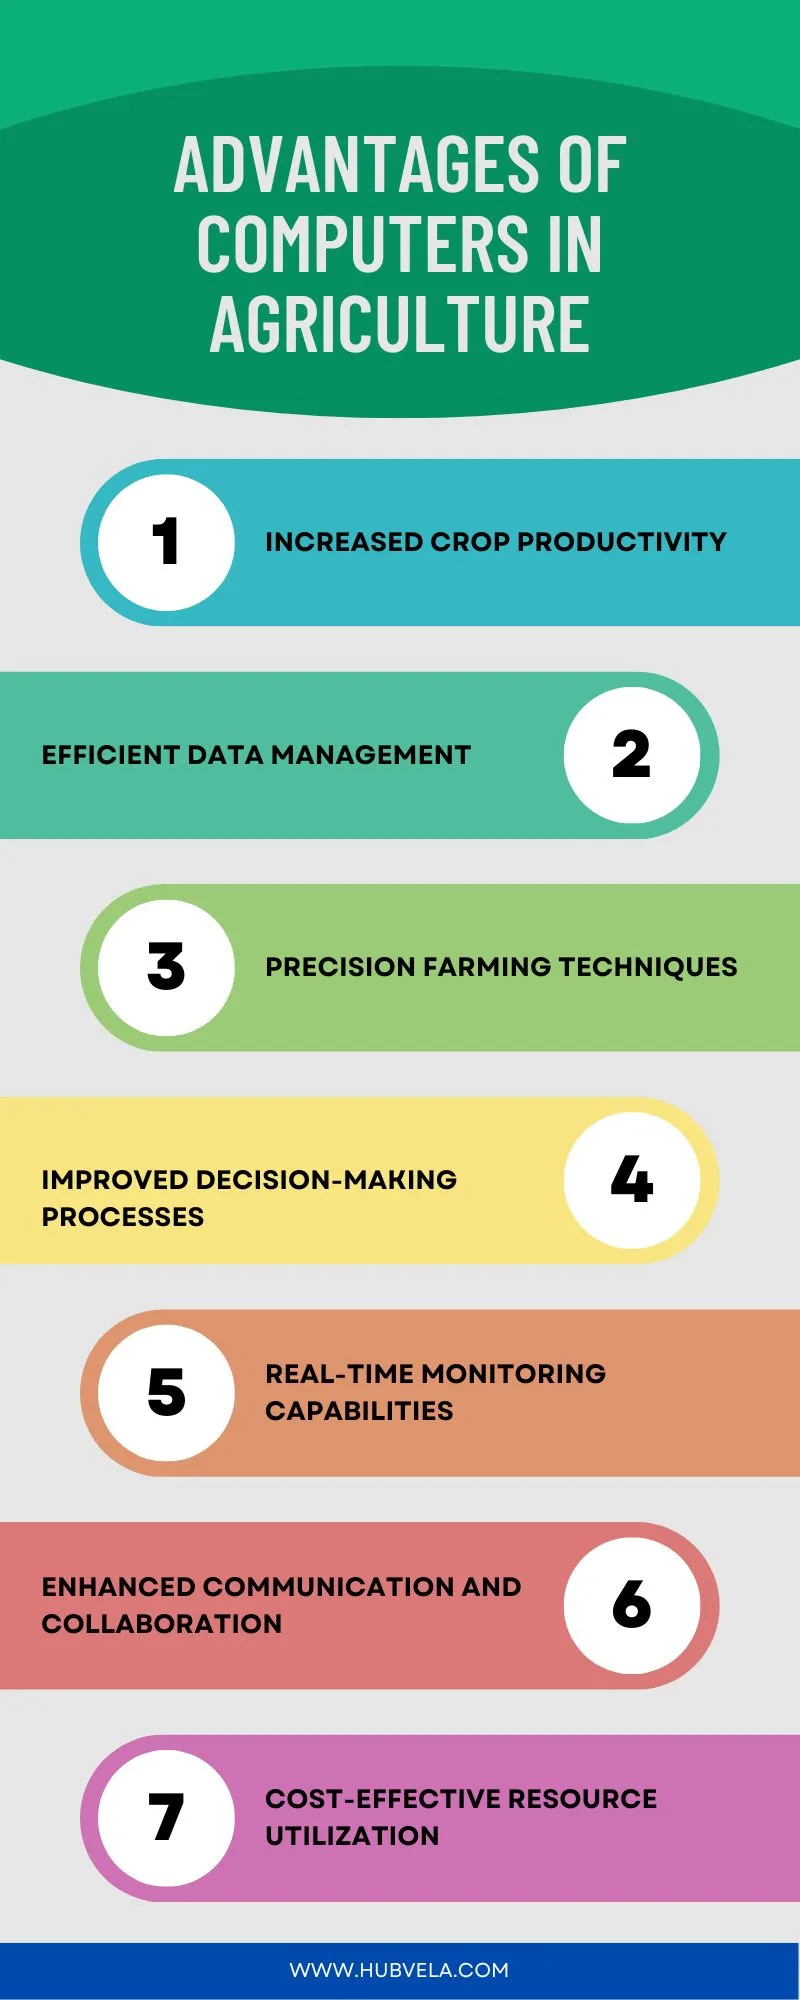 Advantages of Computers in Agriculture Infographic